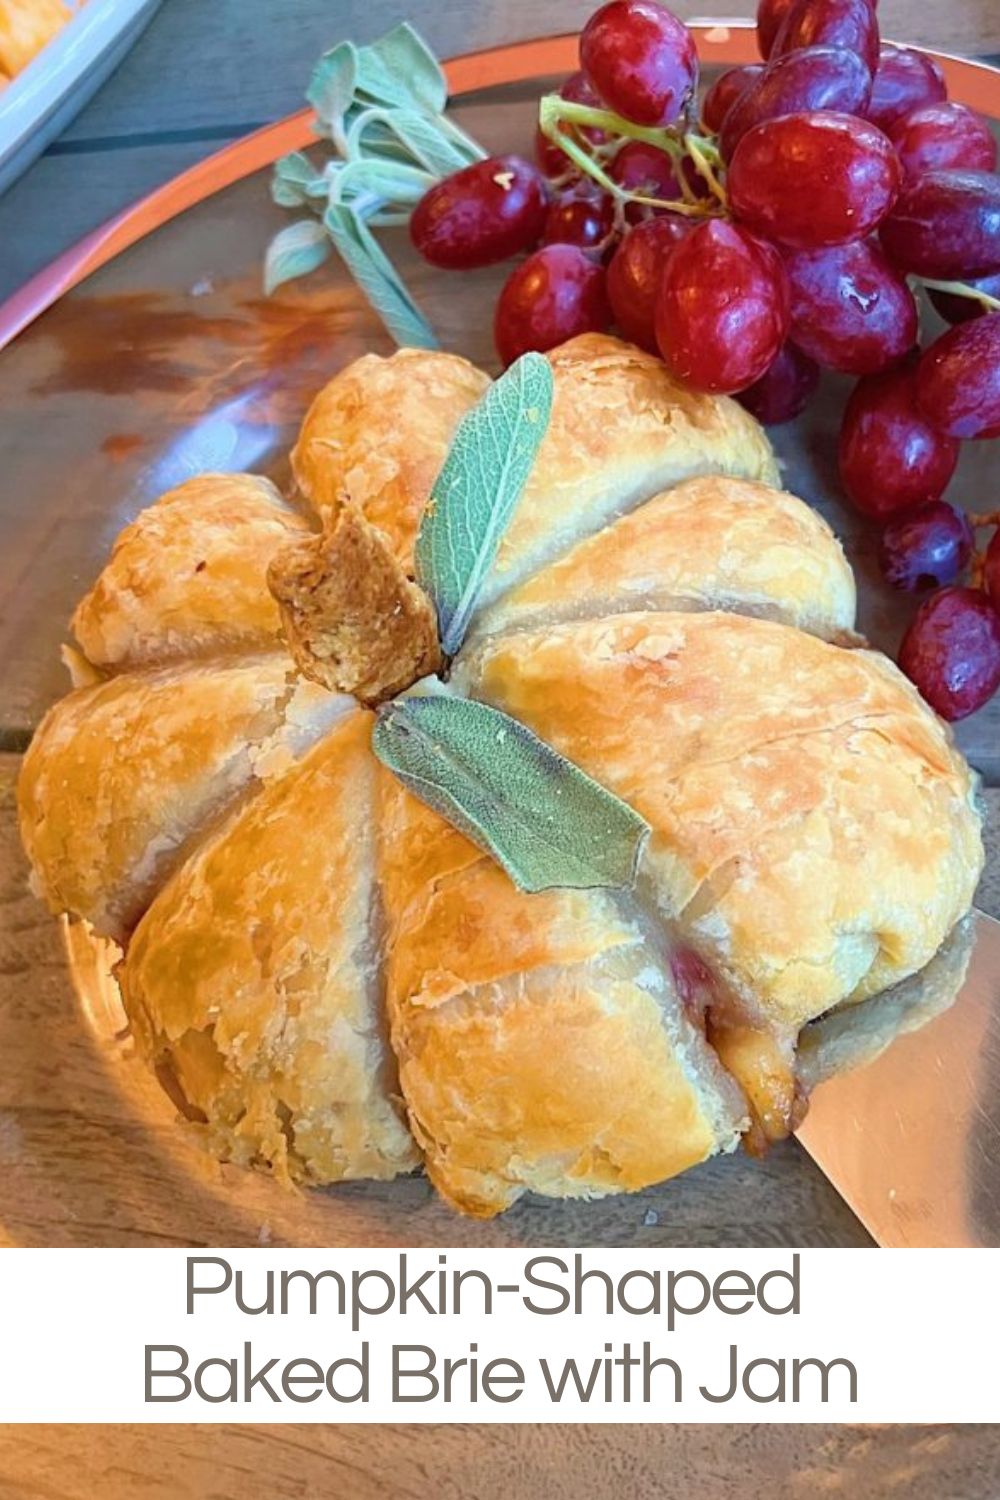 At my book launch party, I made ten Pumpkin-Shaped Baked Brie with Jam appetizers. They were such a hit and so easy to make.